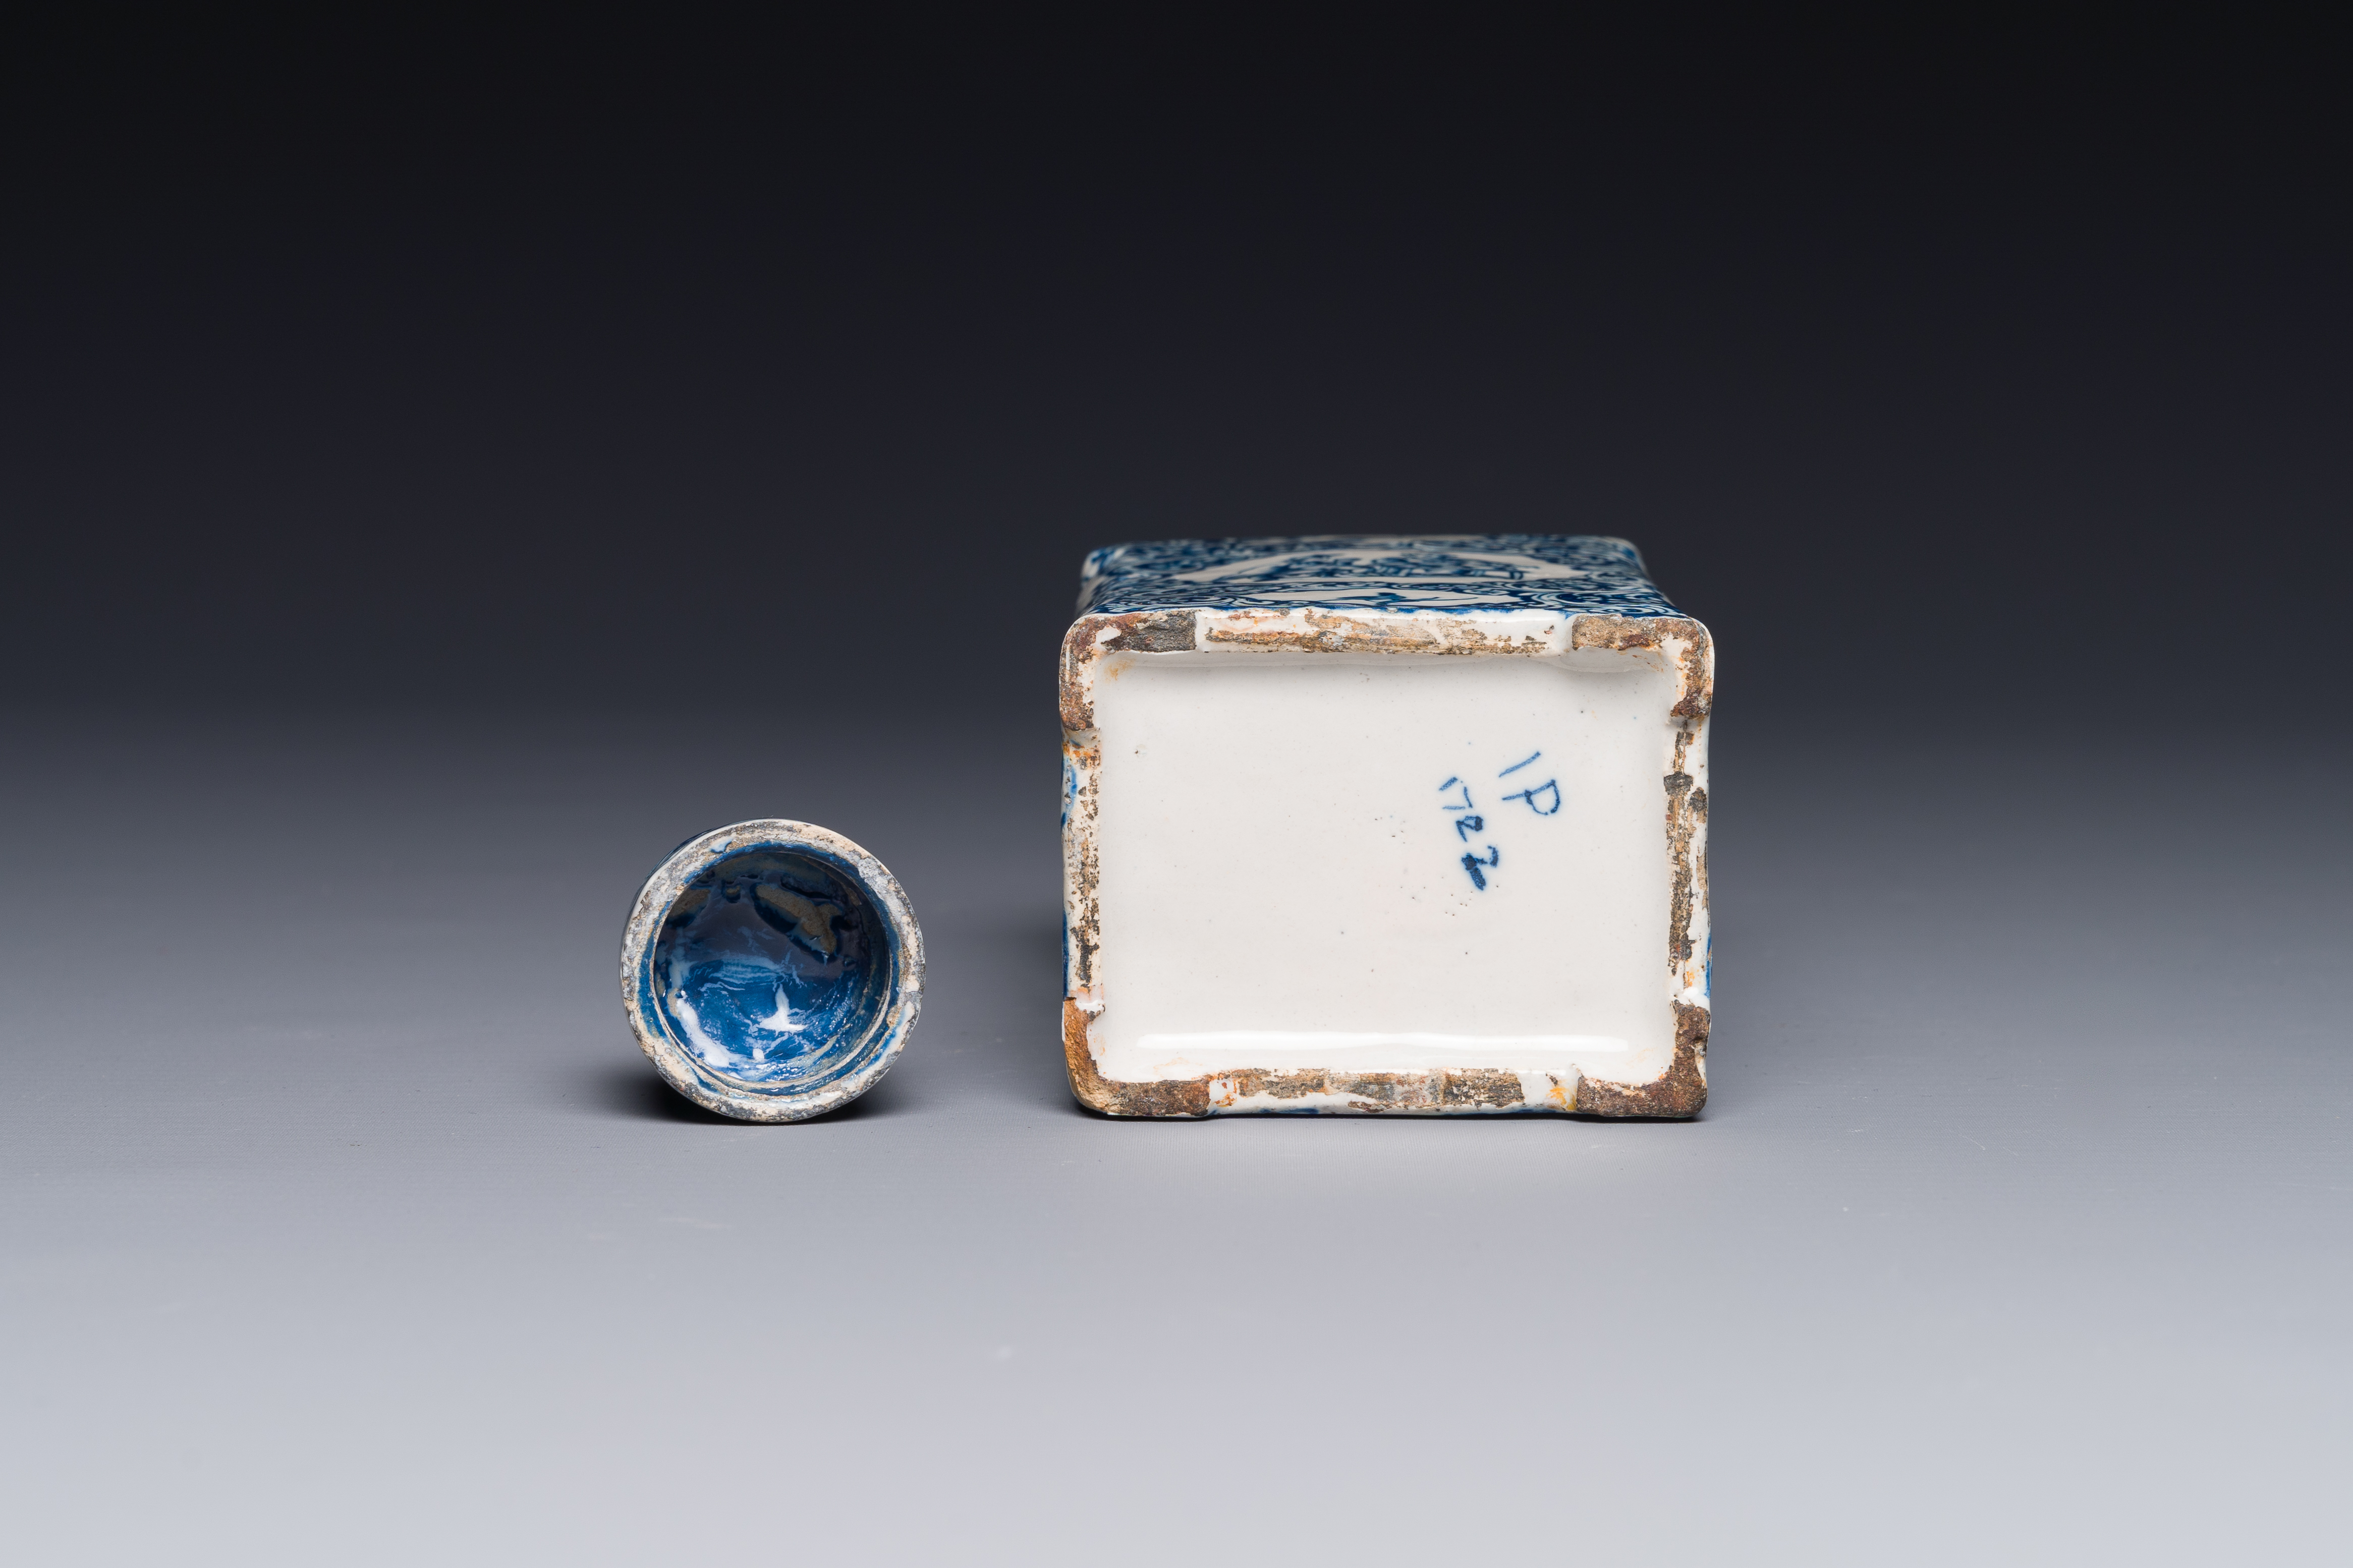 A rectangular Dutch Delft blue and white teacaddy and cover, 18th C. - Image 9 of 10